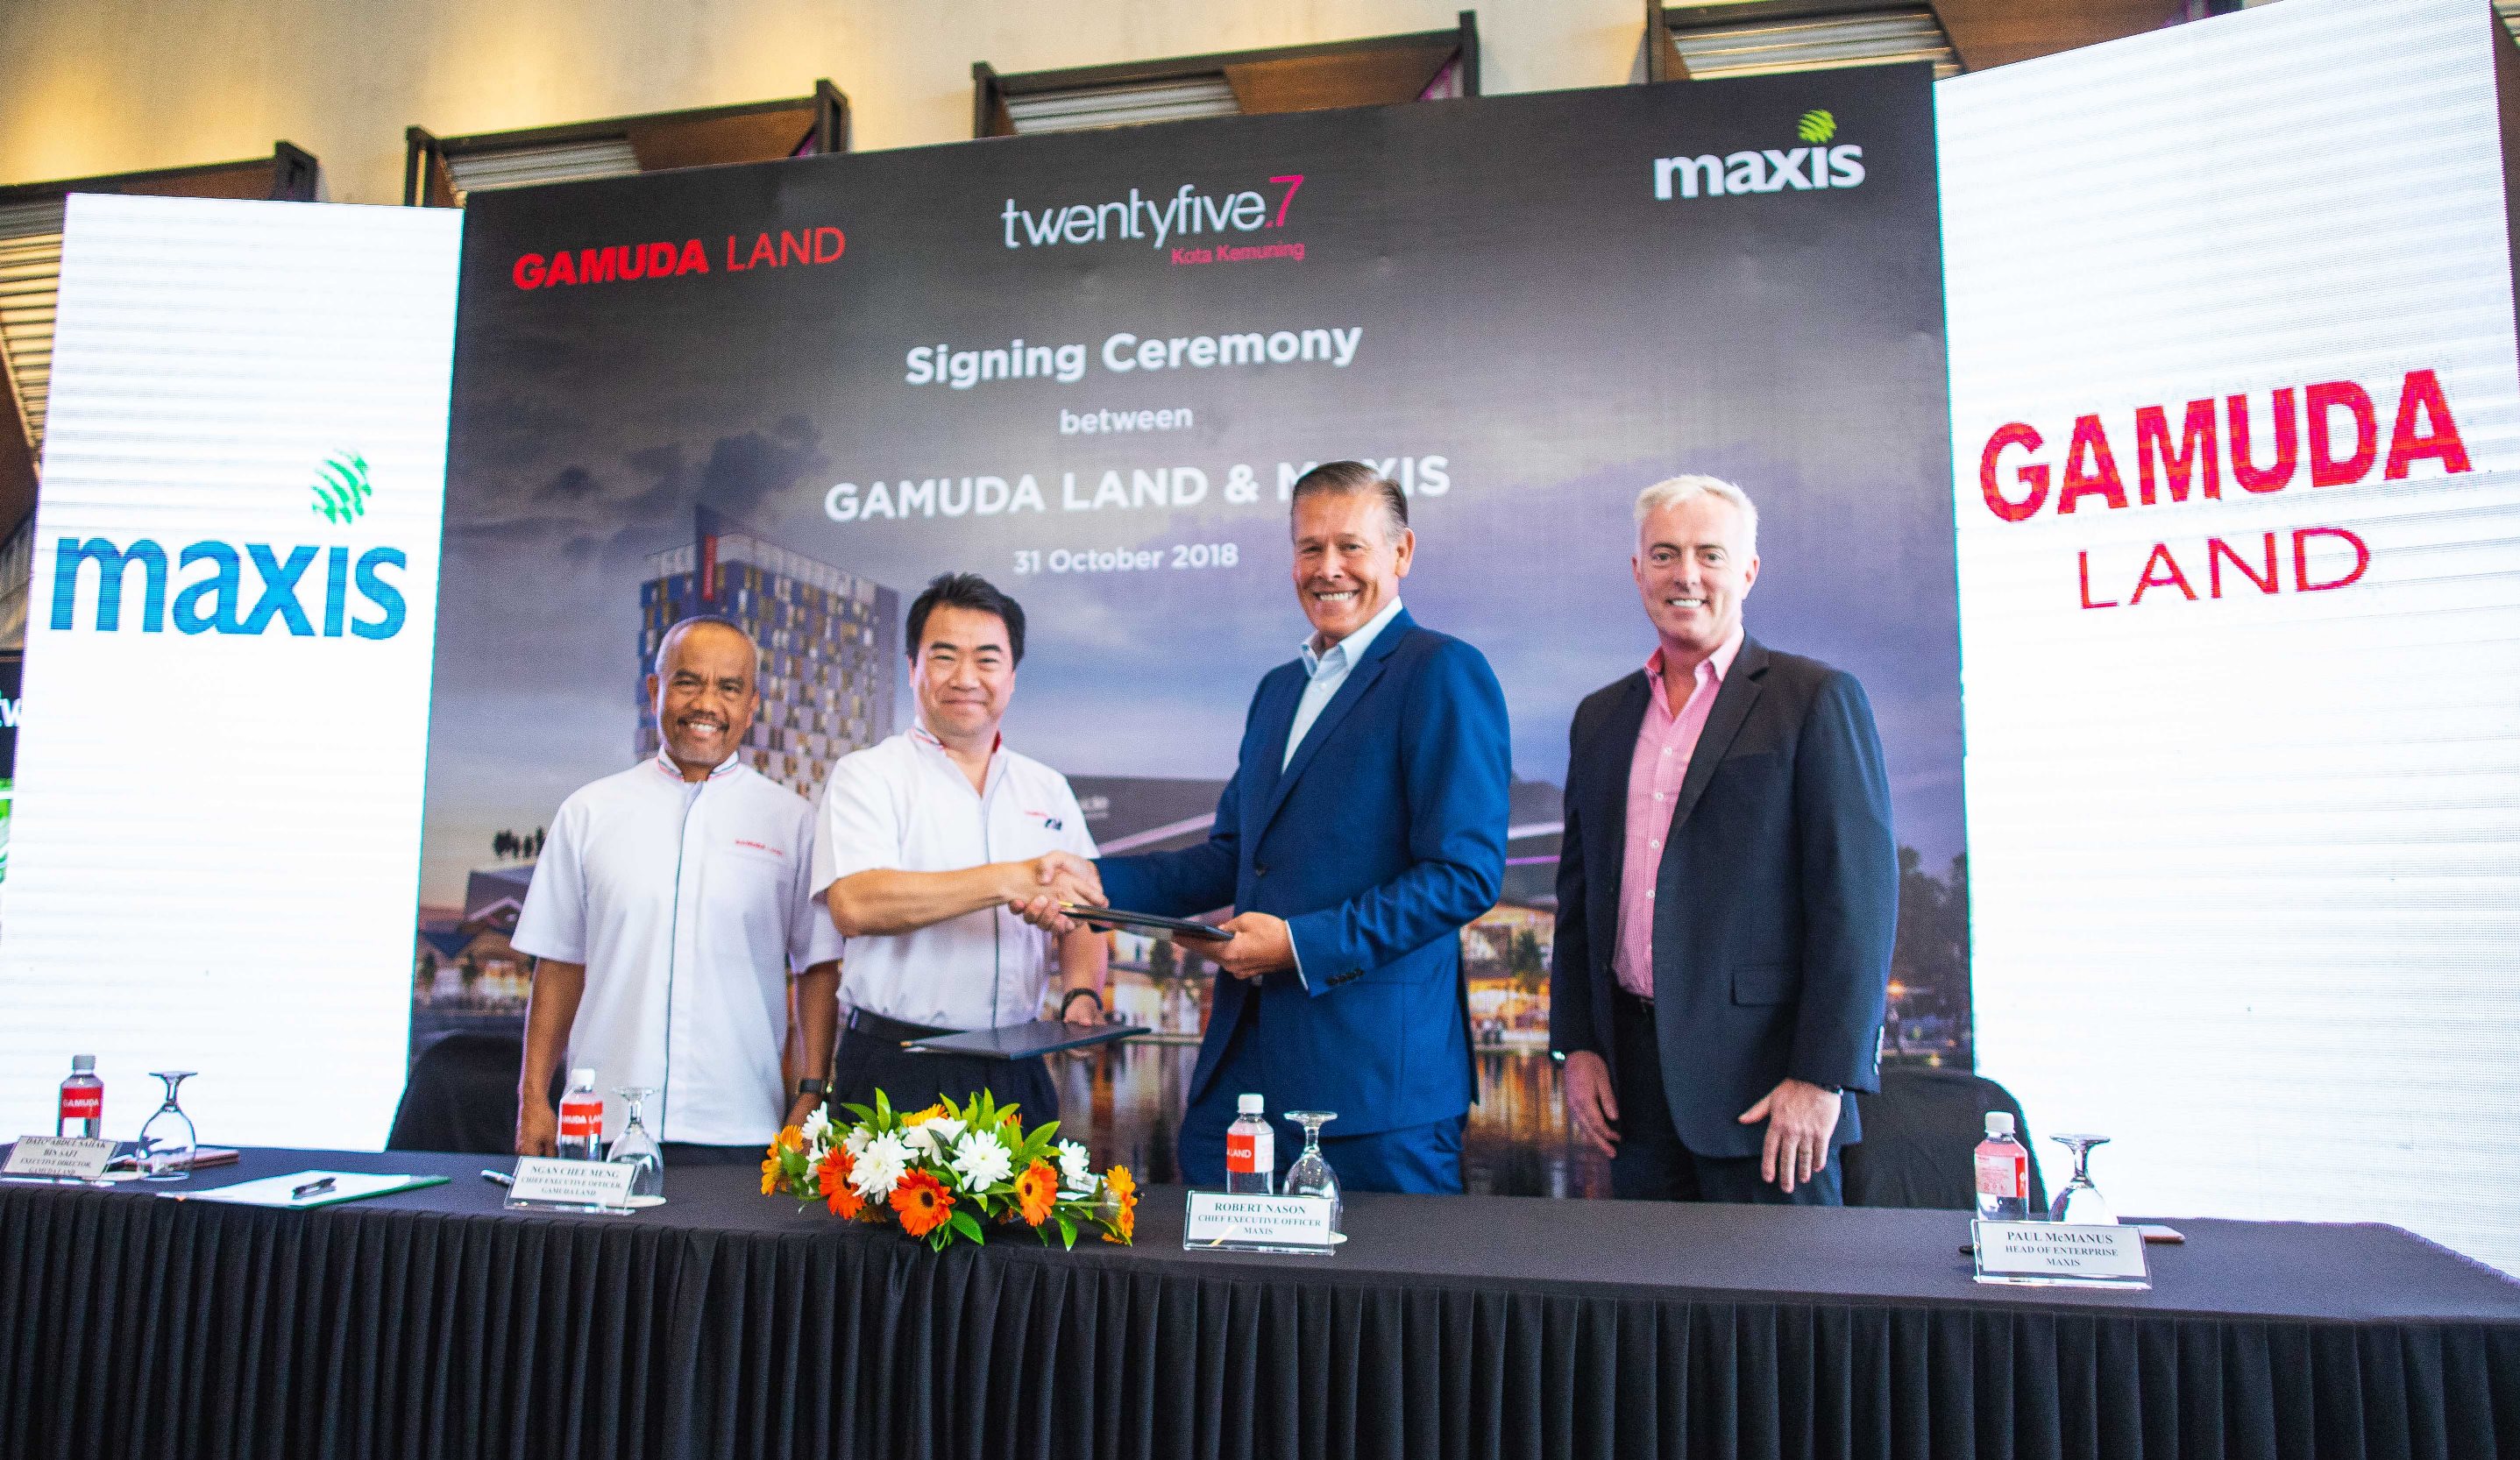 Maxis to provide existing home fibre network up to 300Mbps for Gamuda Land’s twentyfive.7